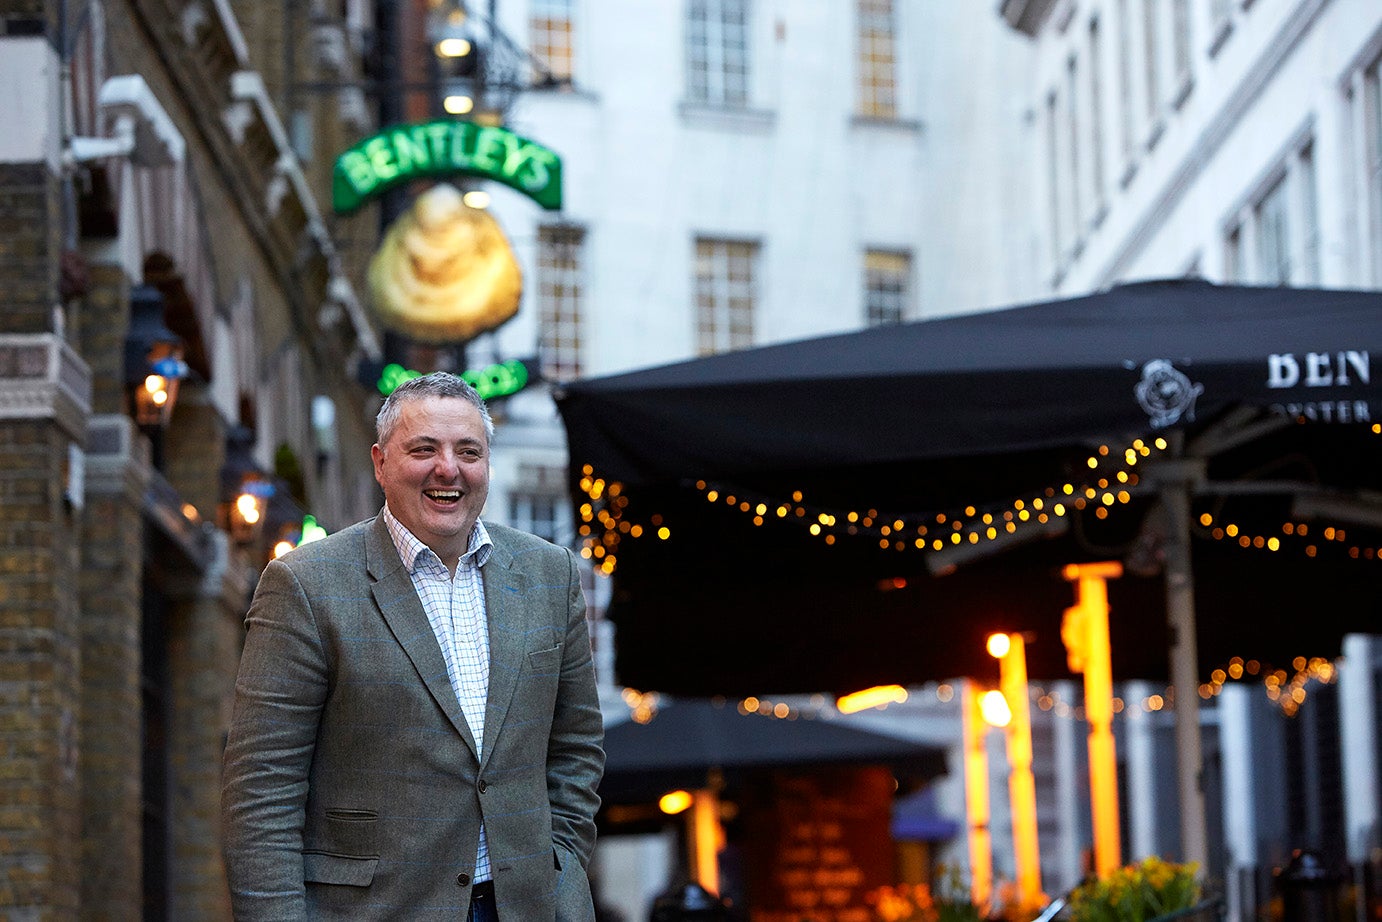 Festivities for the Guinness-soaked affair will kick off today at Corrigan’s Mayfair